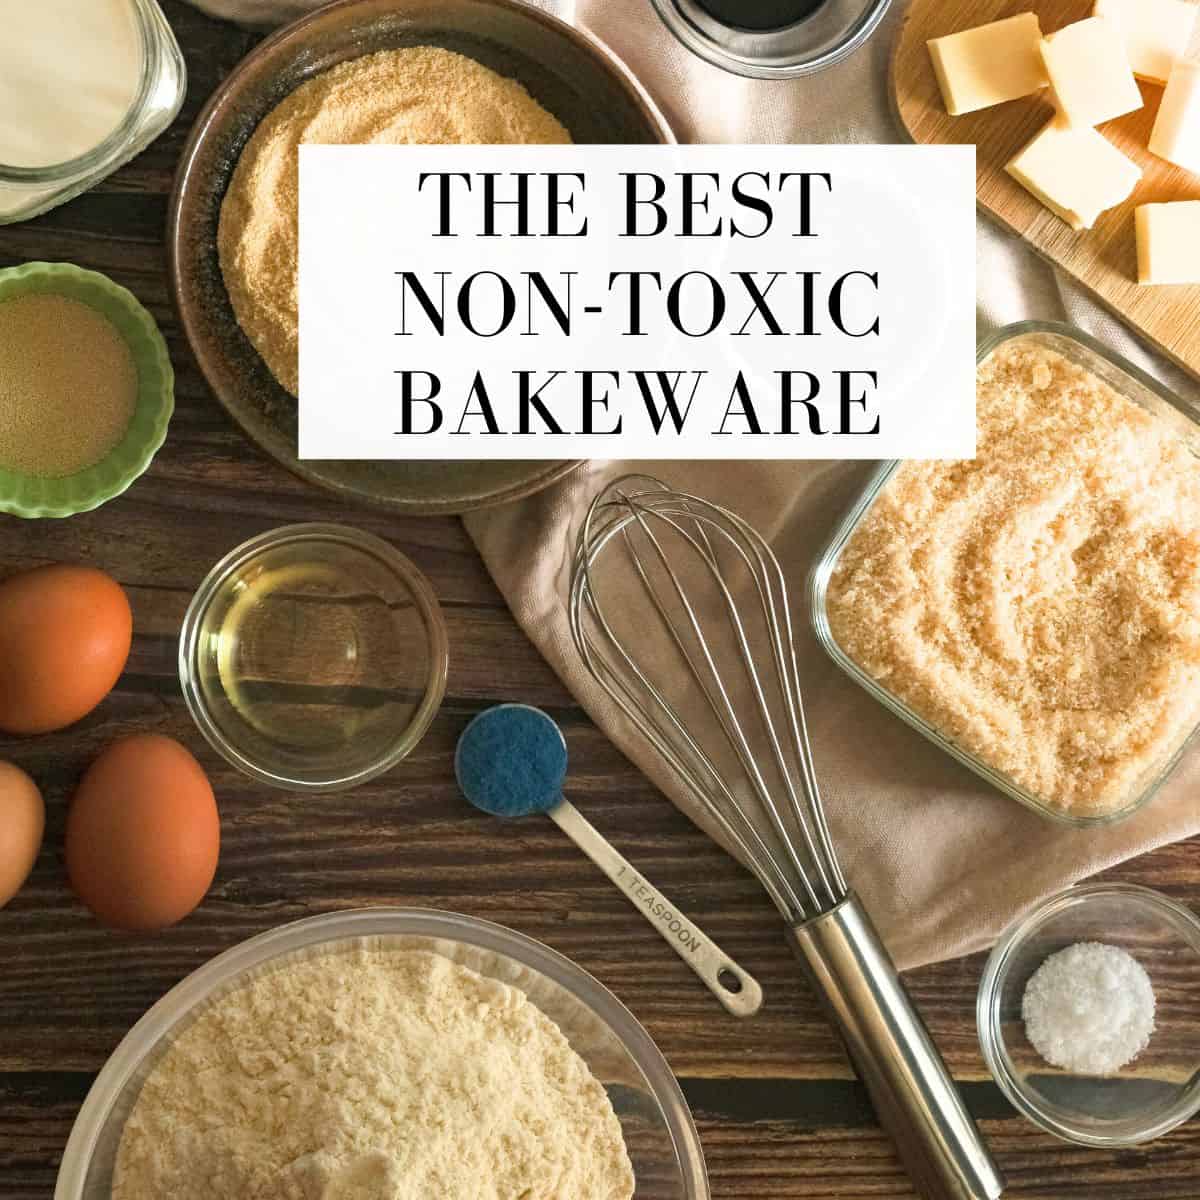 Are There Bakeware Options for Allergen-free Baking?